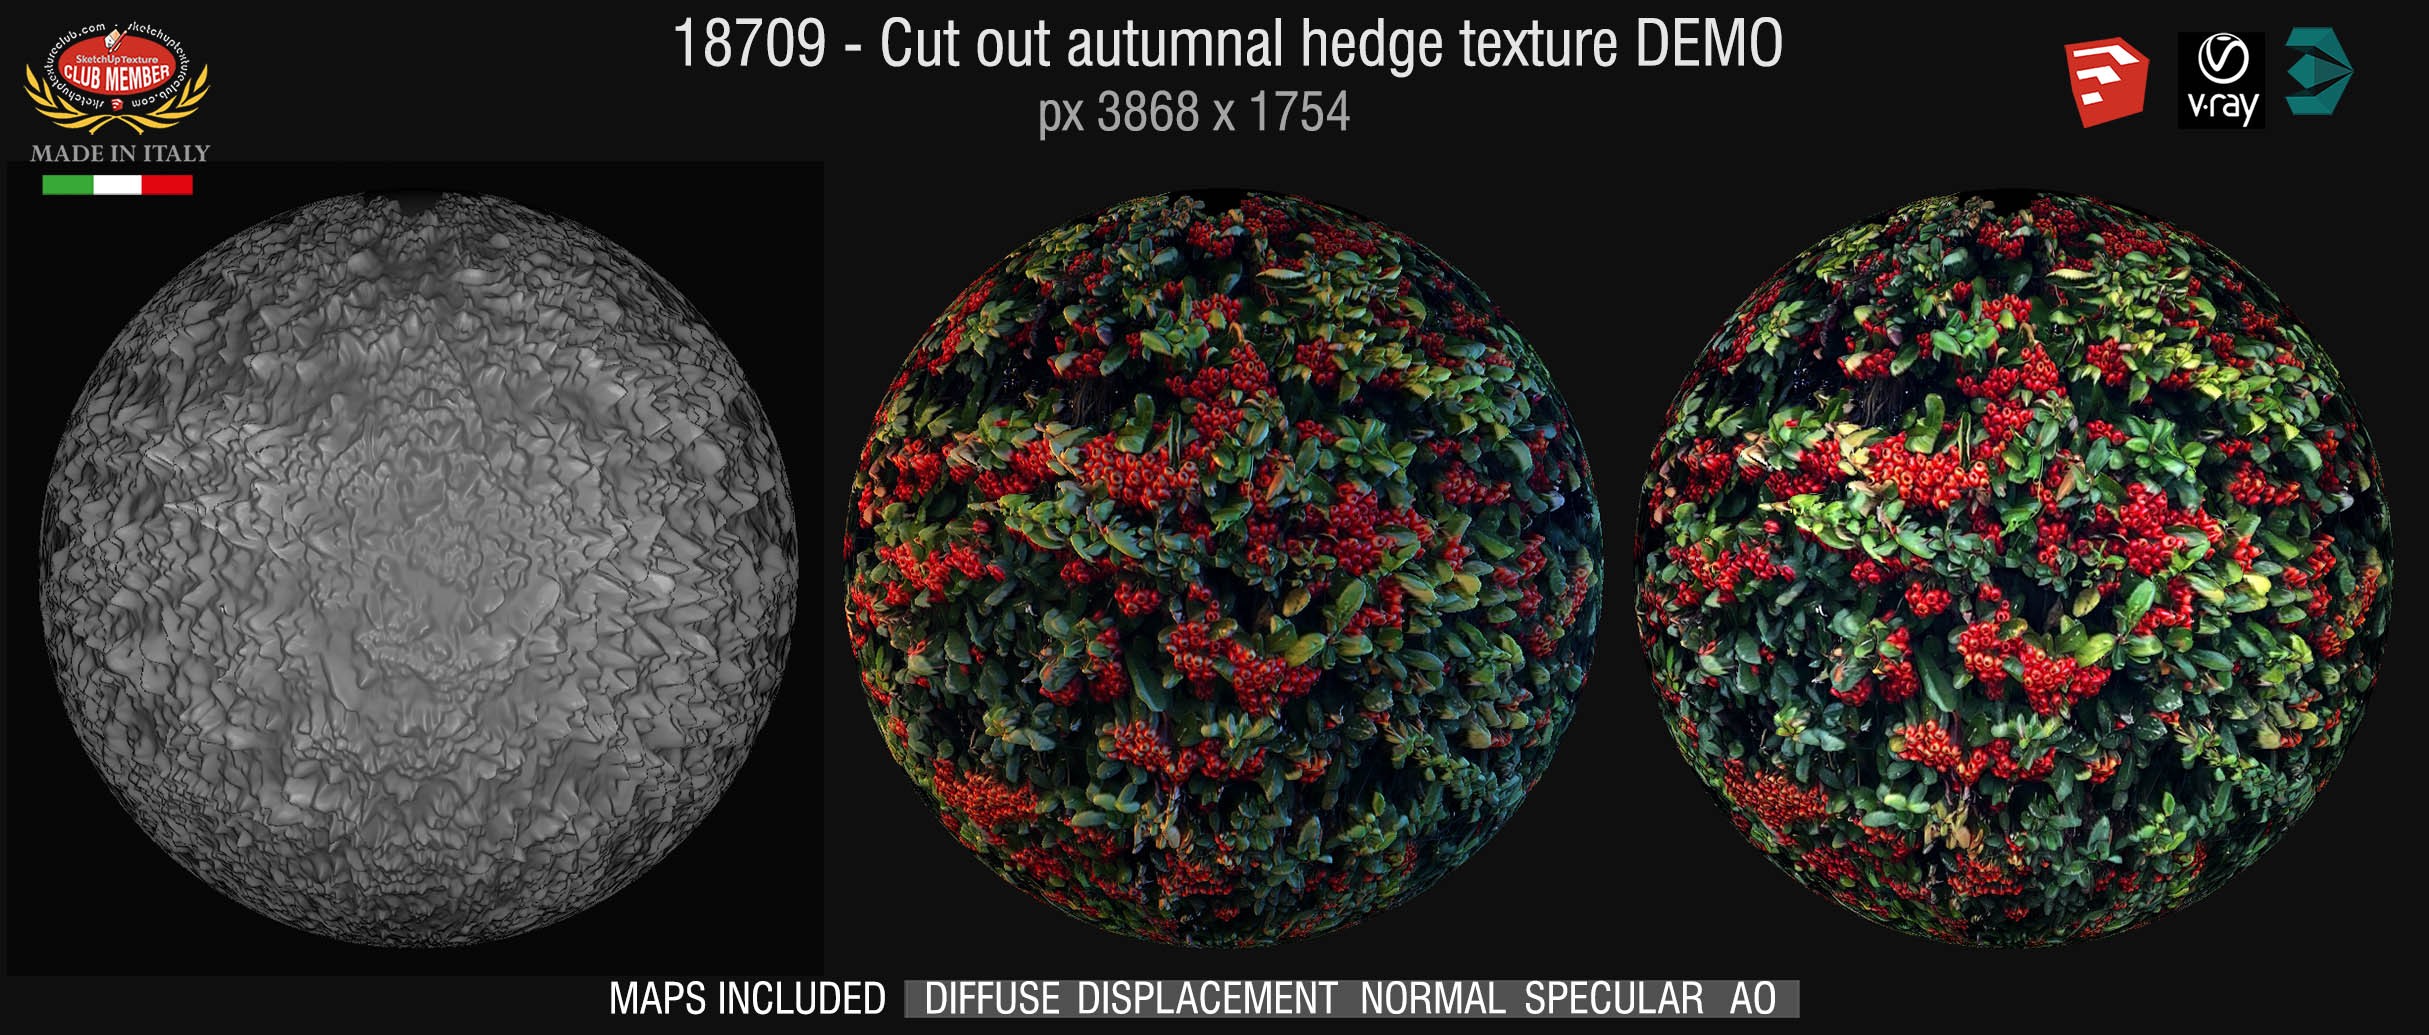 18709 HR Cut out autumnal hedge texture + maps DEMO